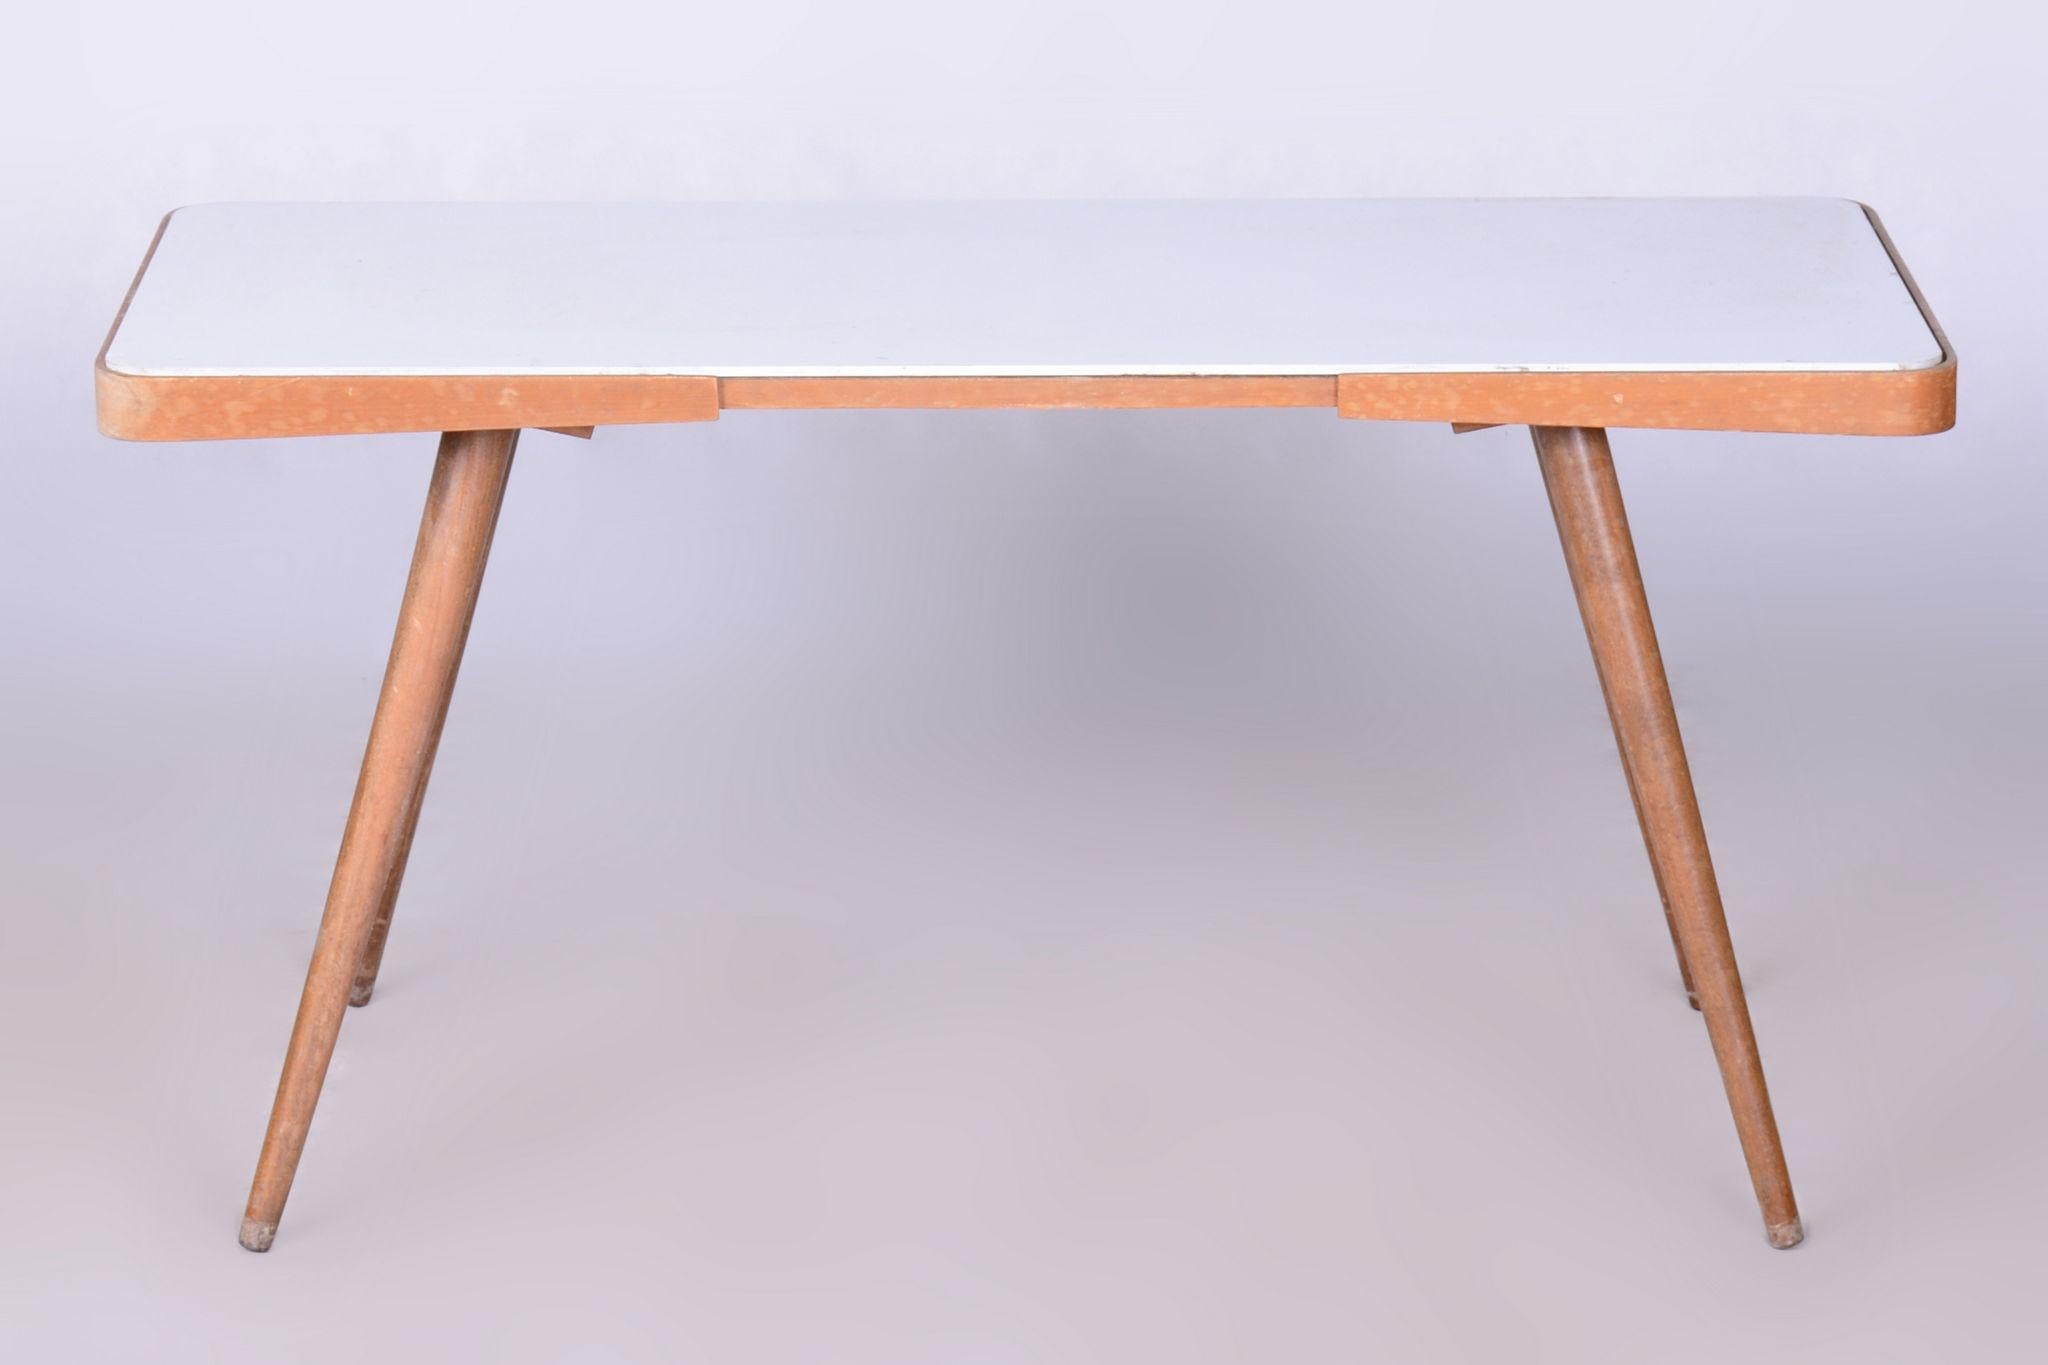 Original Coffee Table by Interier Praha.

Maker: Interier Praha
Period: 1960-1969
Source: Czechia (Czechoslovakia)
Material: Beech, Opaxit Glass

Well-preserved condition. Reived polish.

Made by Interier Praha, the state furniture company in